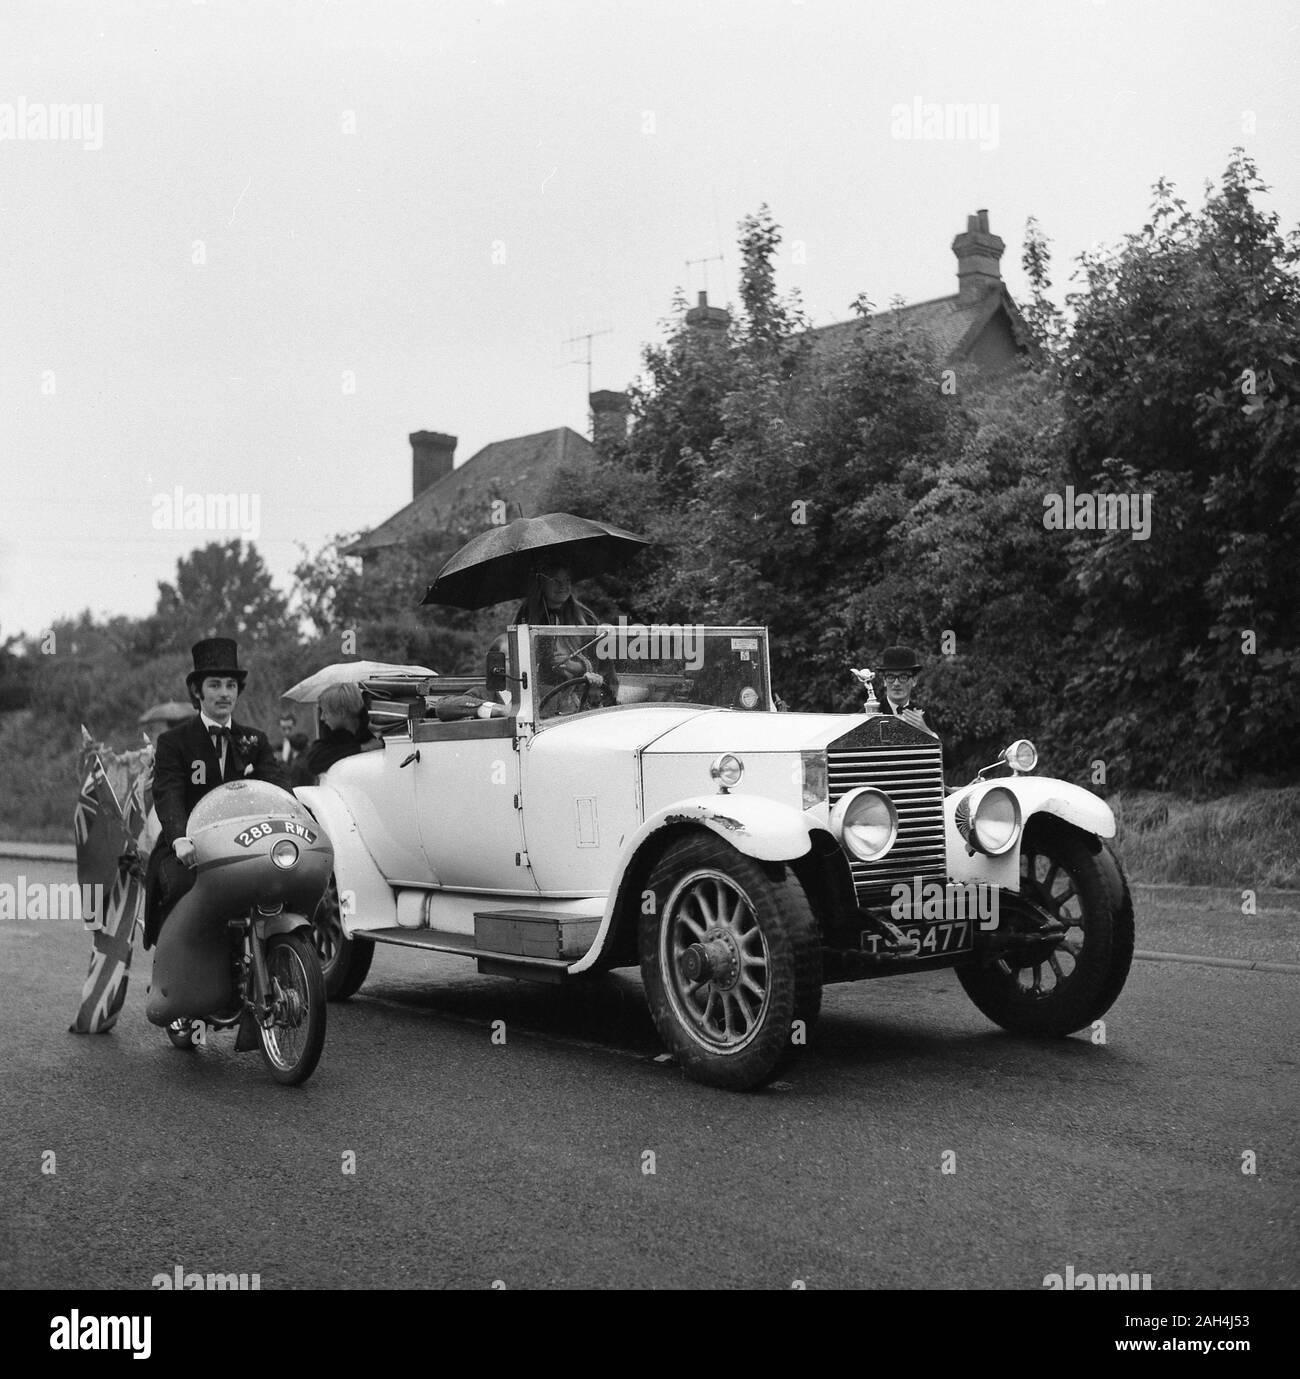 1967, historical, parade, english village, motorbike and a vintage rolls-royce motor car on a road, Buckinghamshire, England. Stock Photo